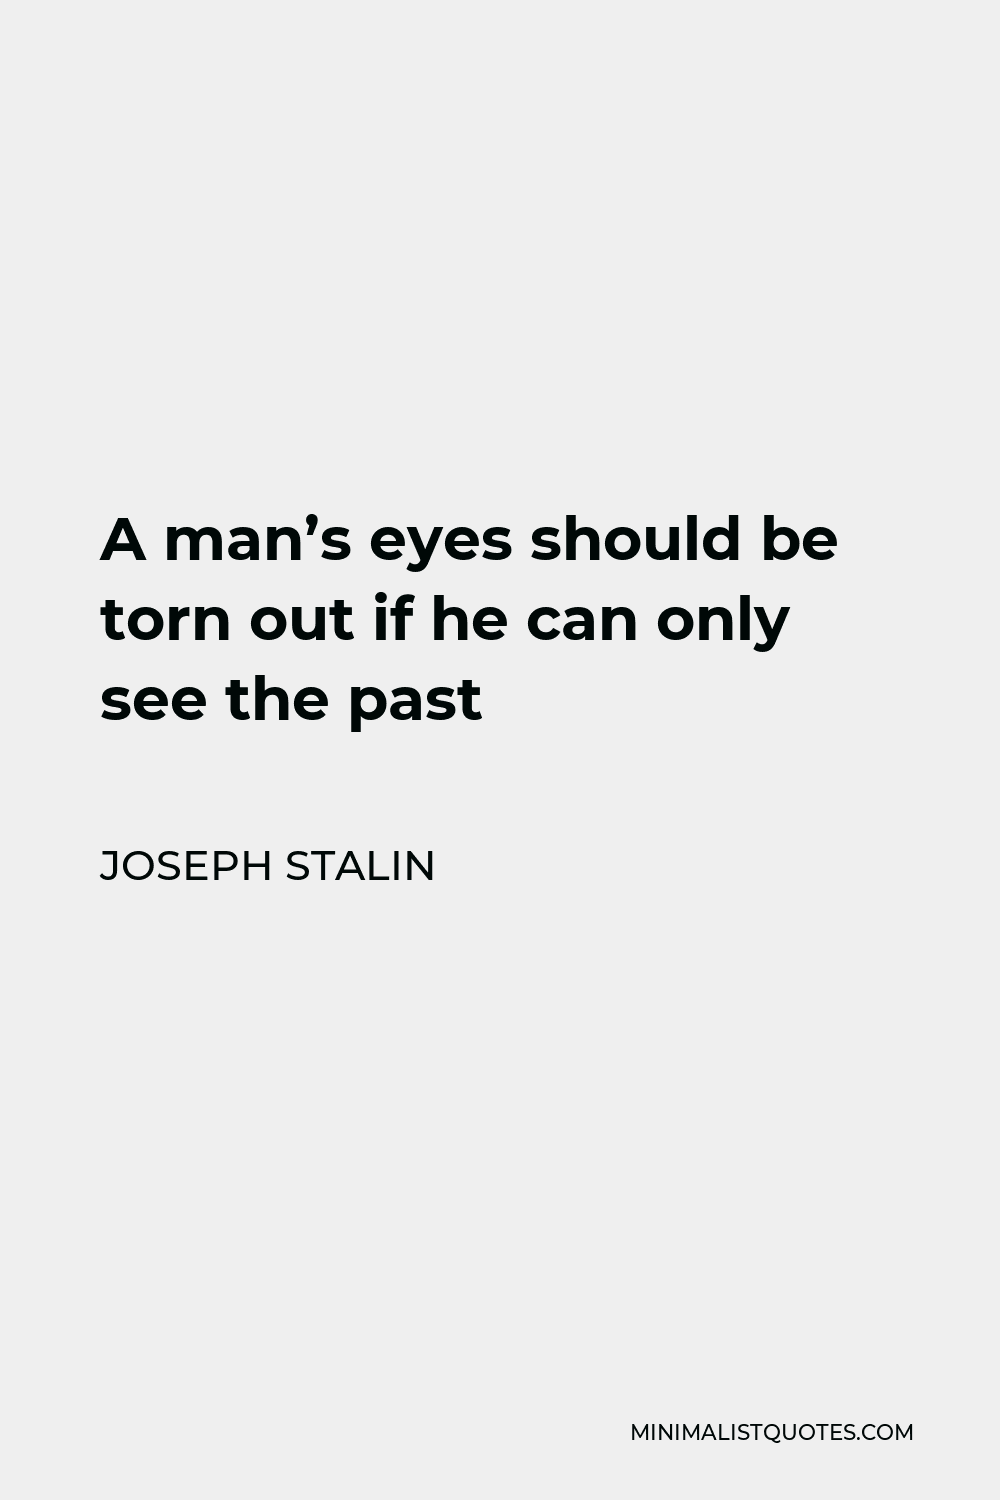 Joseph Stalin Quote - A man’s eyes should be torn out if he can only see the past